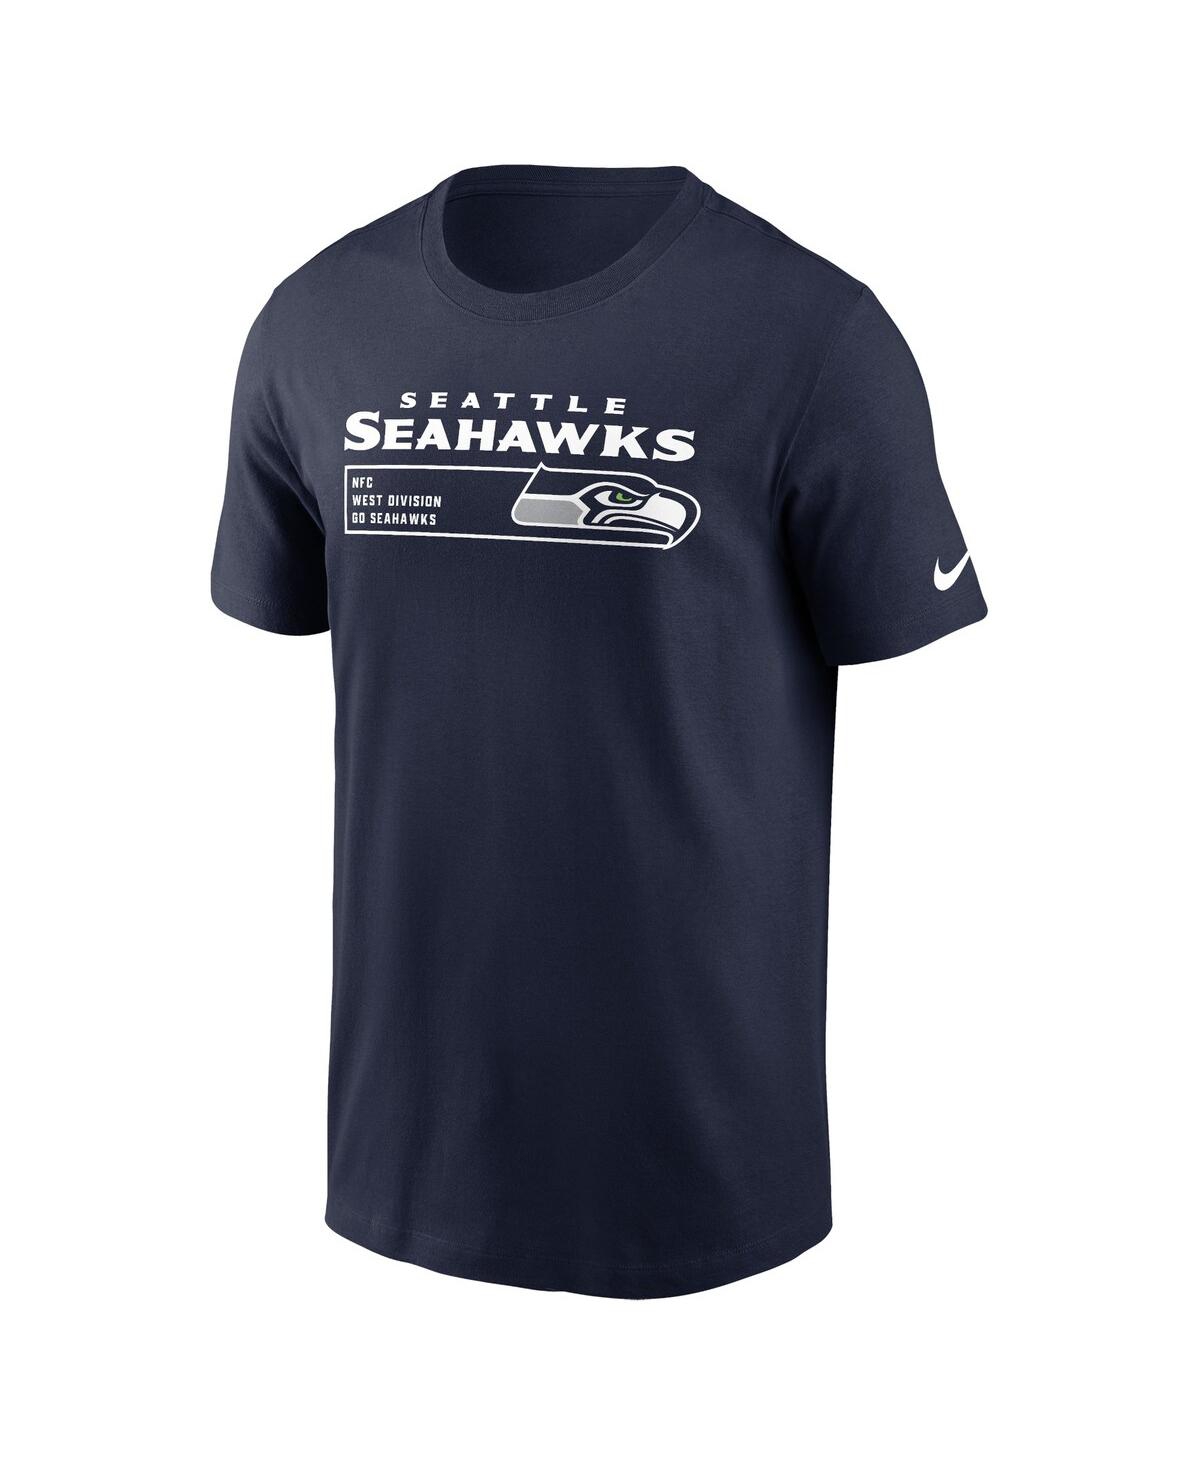 Shop Nike Men's  College Navy Seattle Seahawks Division Essential T-shirt